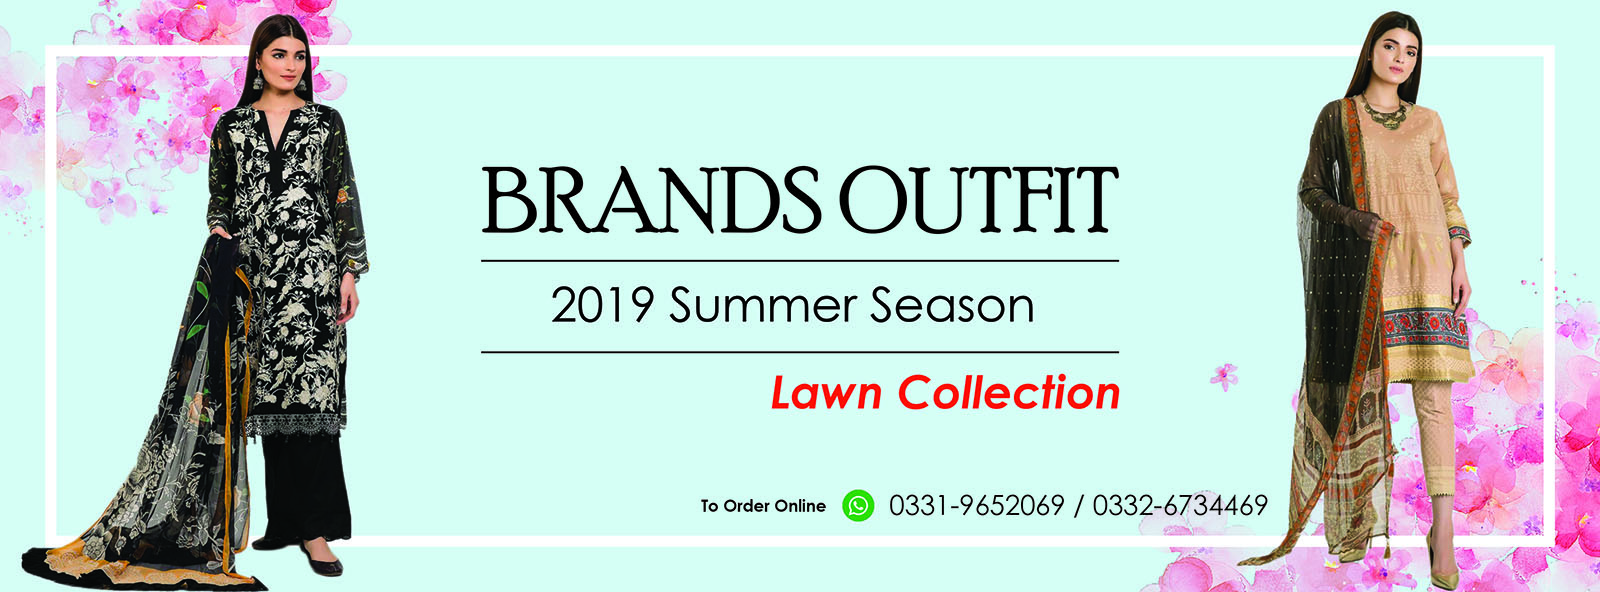 Summer Lawn Collection